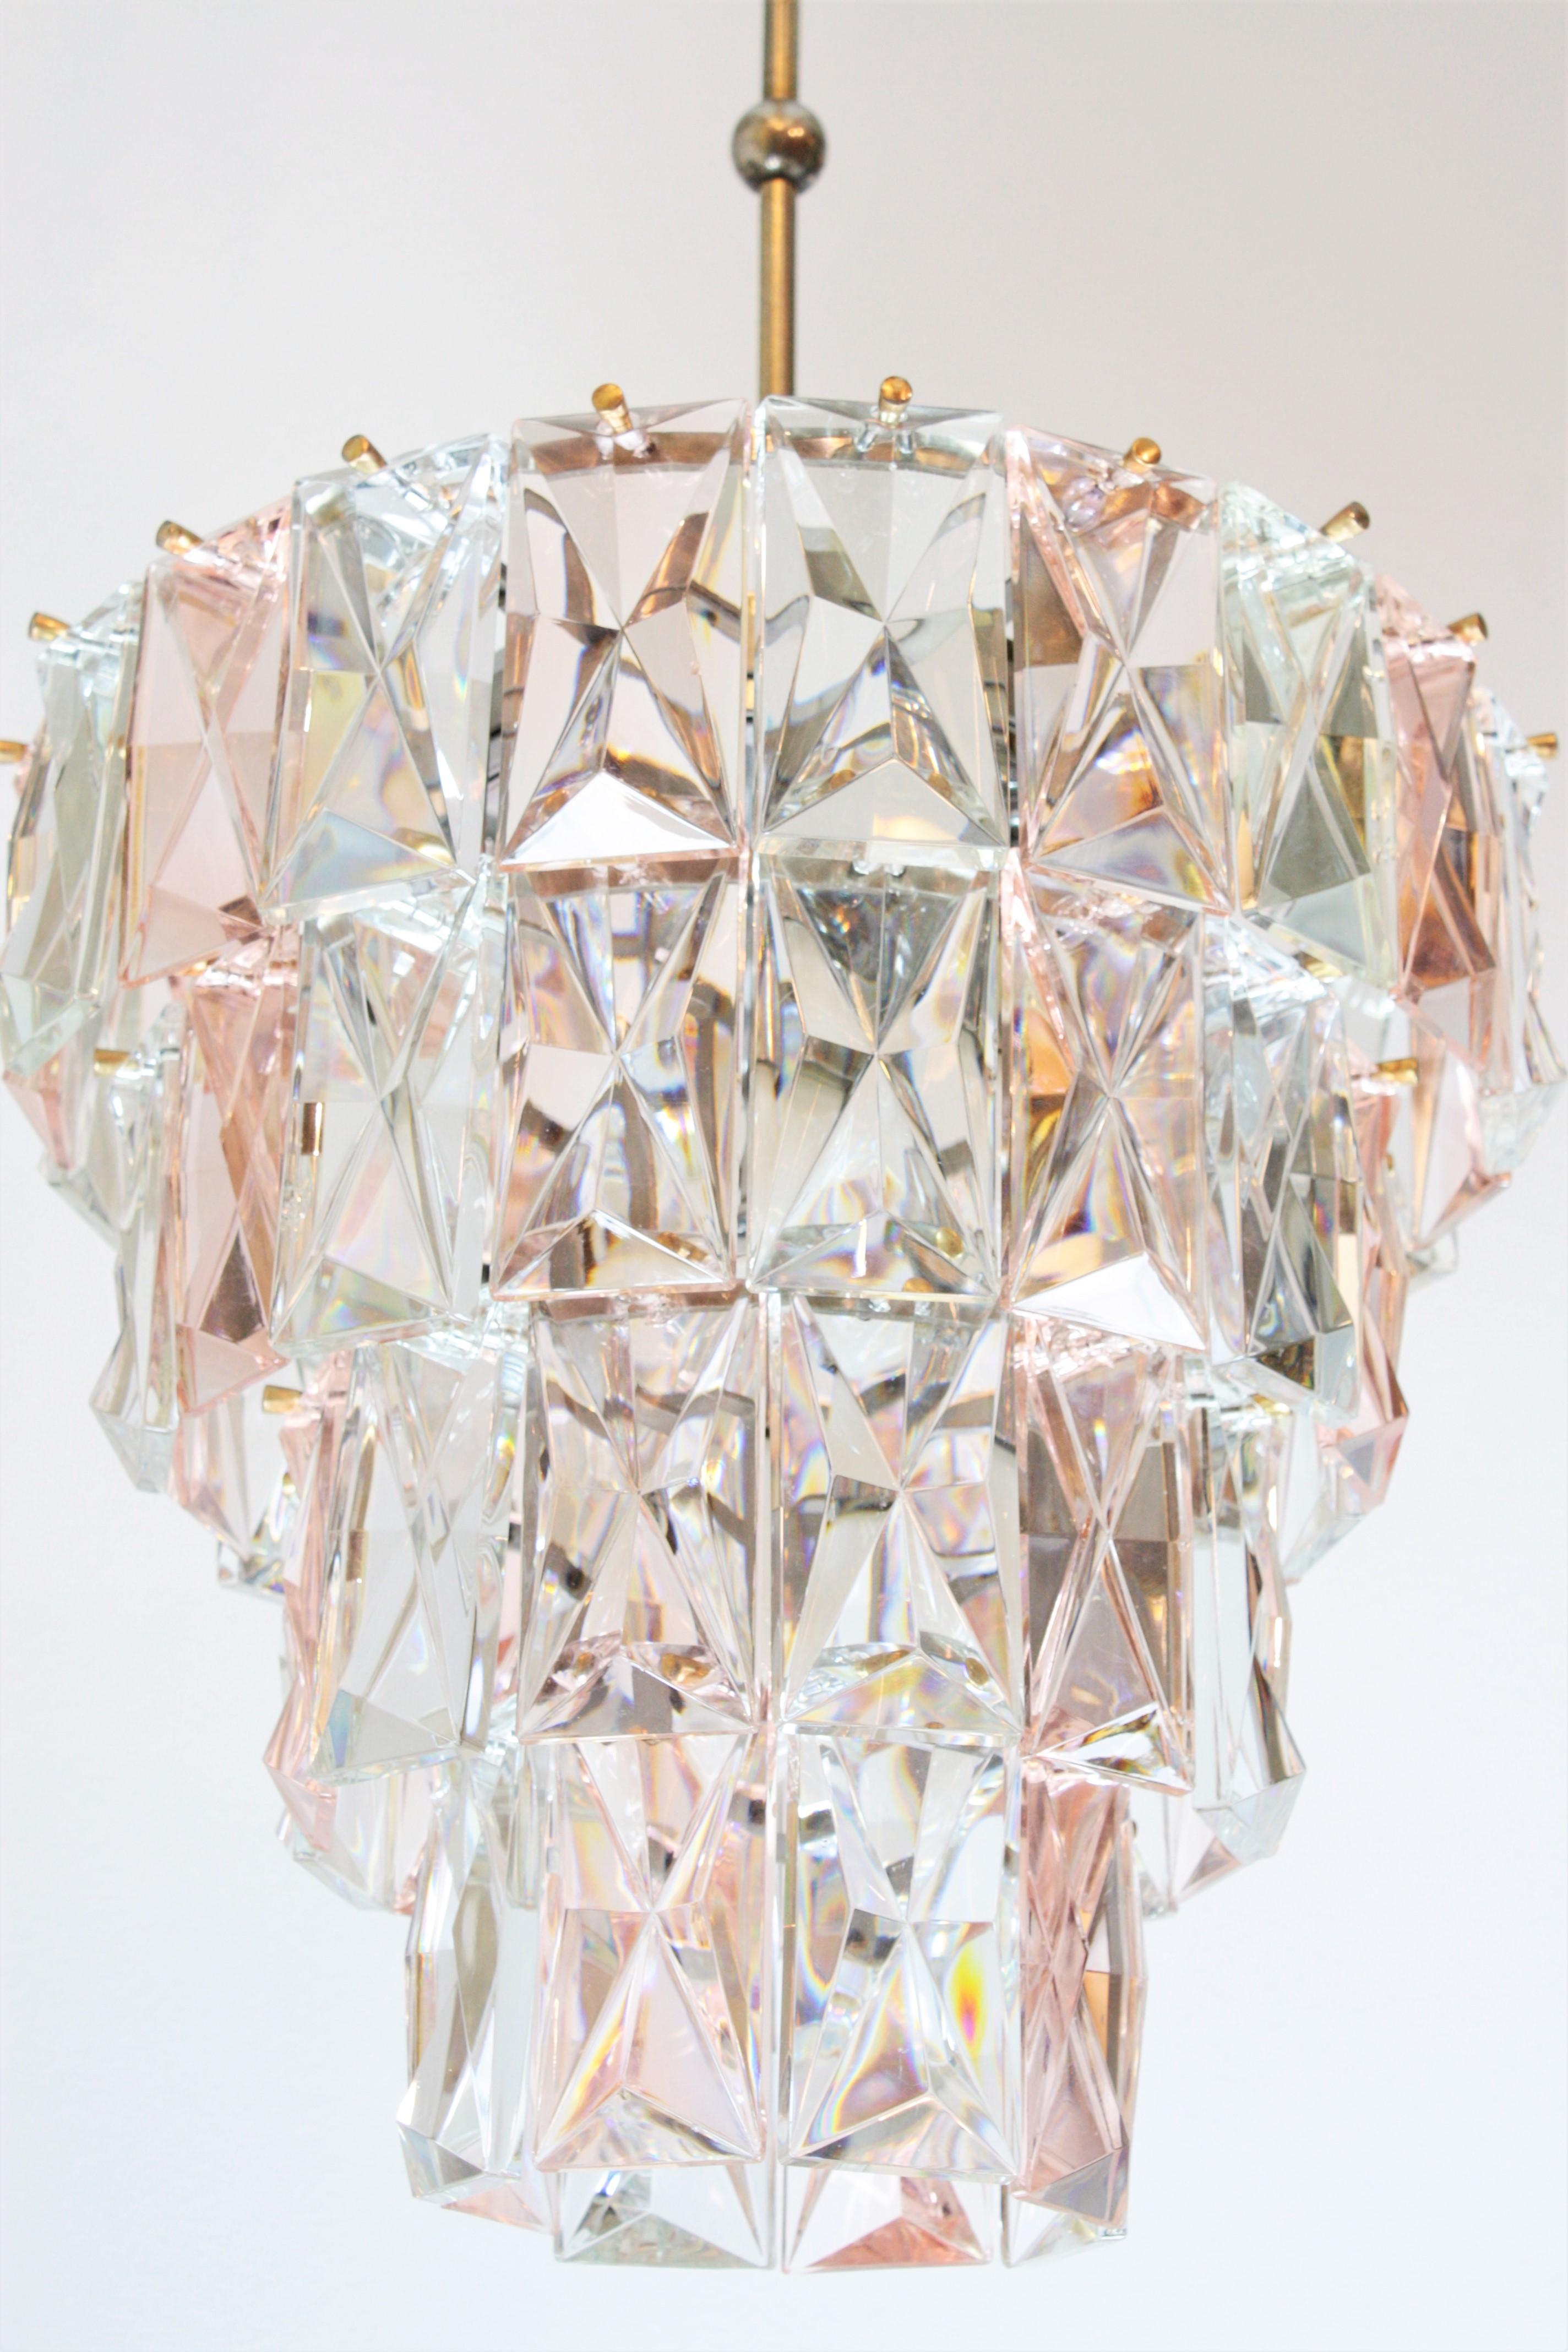 Midcentury Kinkeldey Chandelier in Pink and Clear Faceted Crystal, 1960s For Sale 2